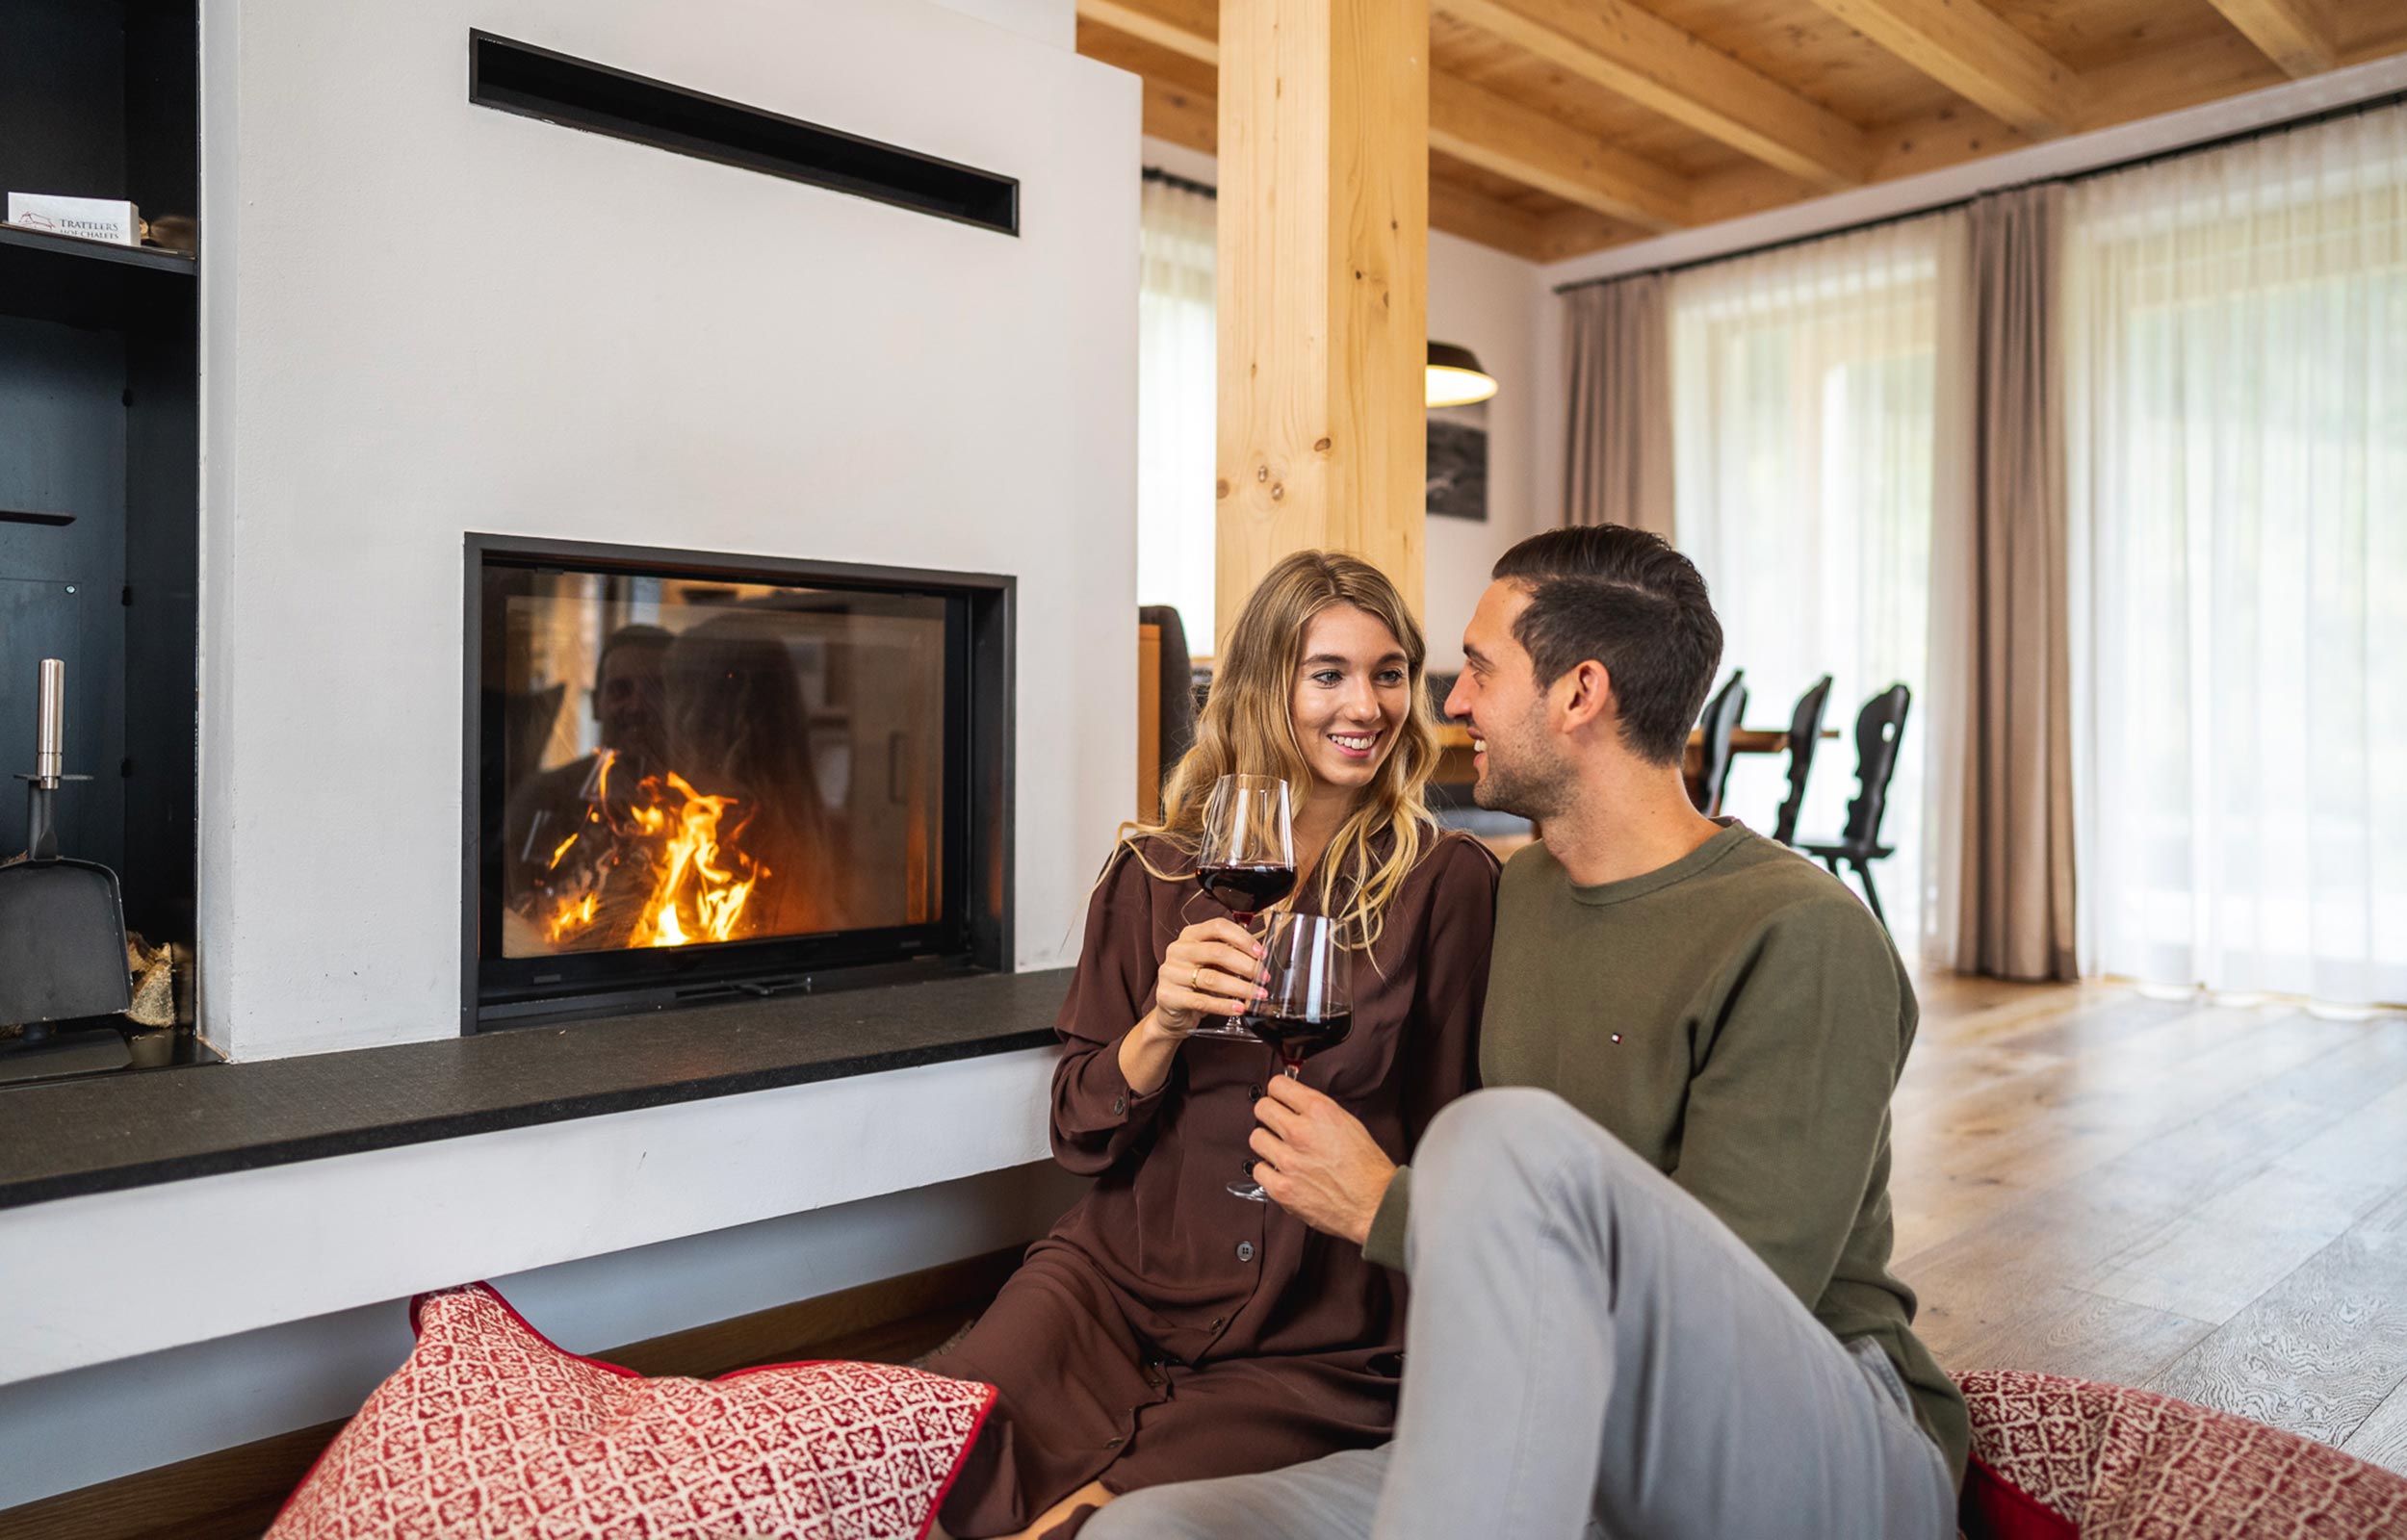 A couple is sitting in front of a fireplace drinking red wine.